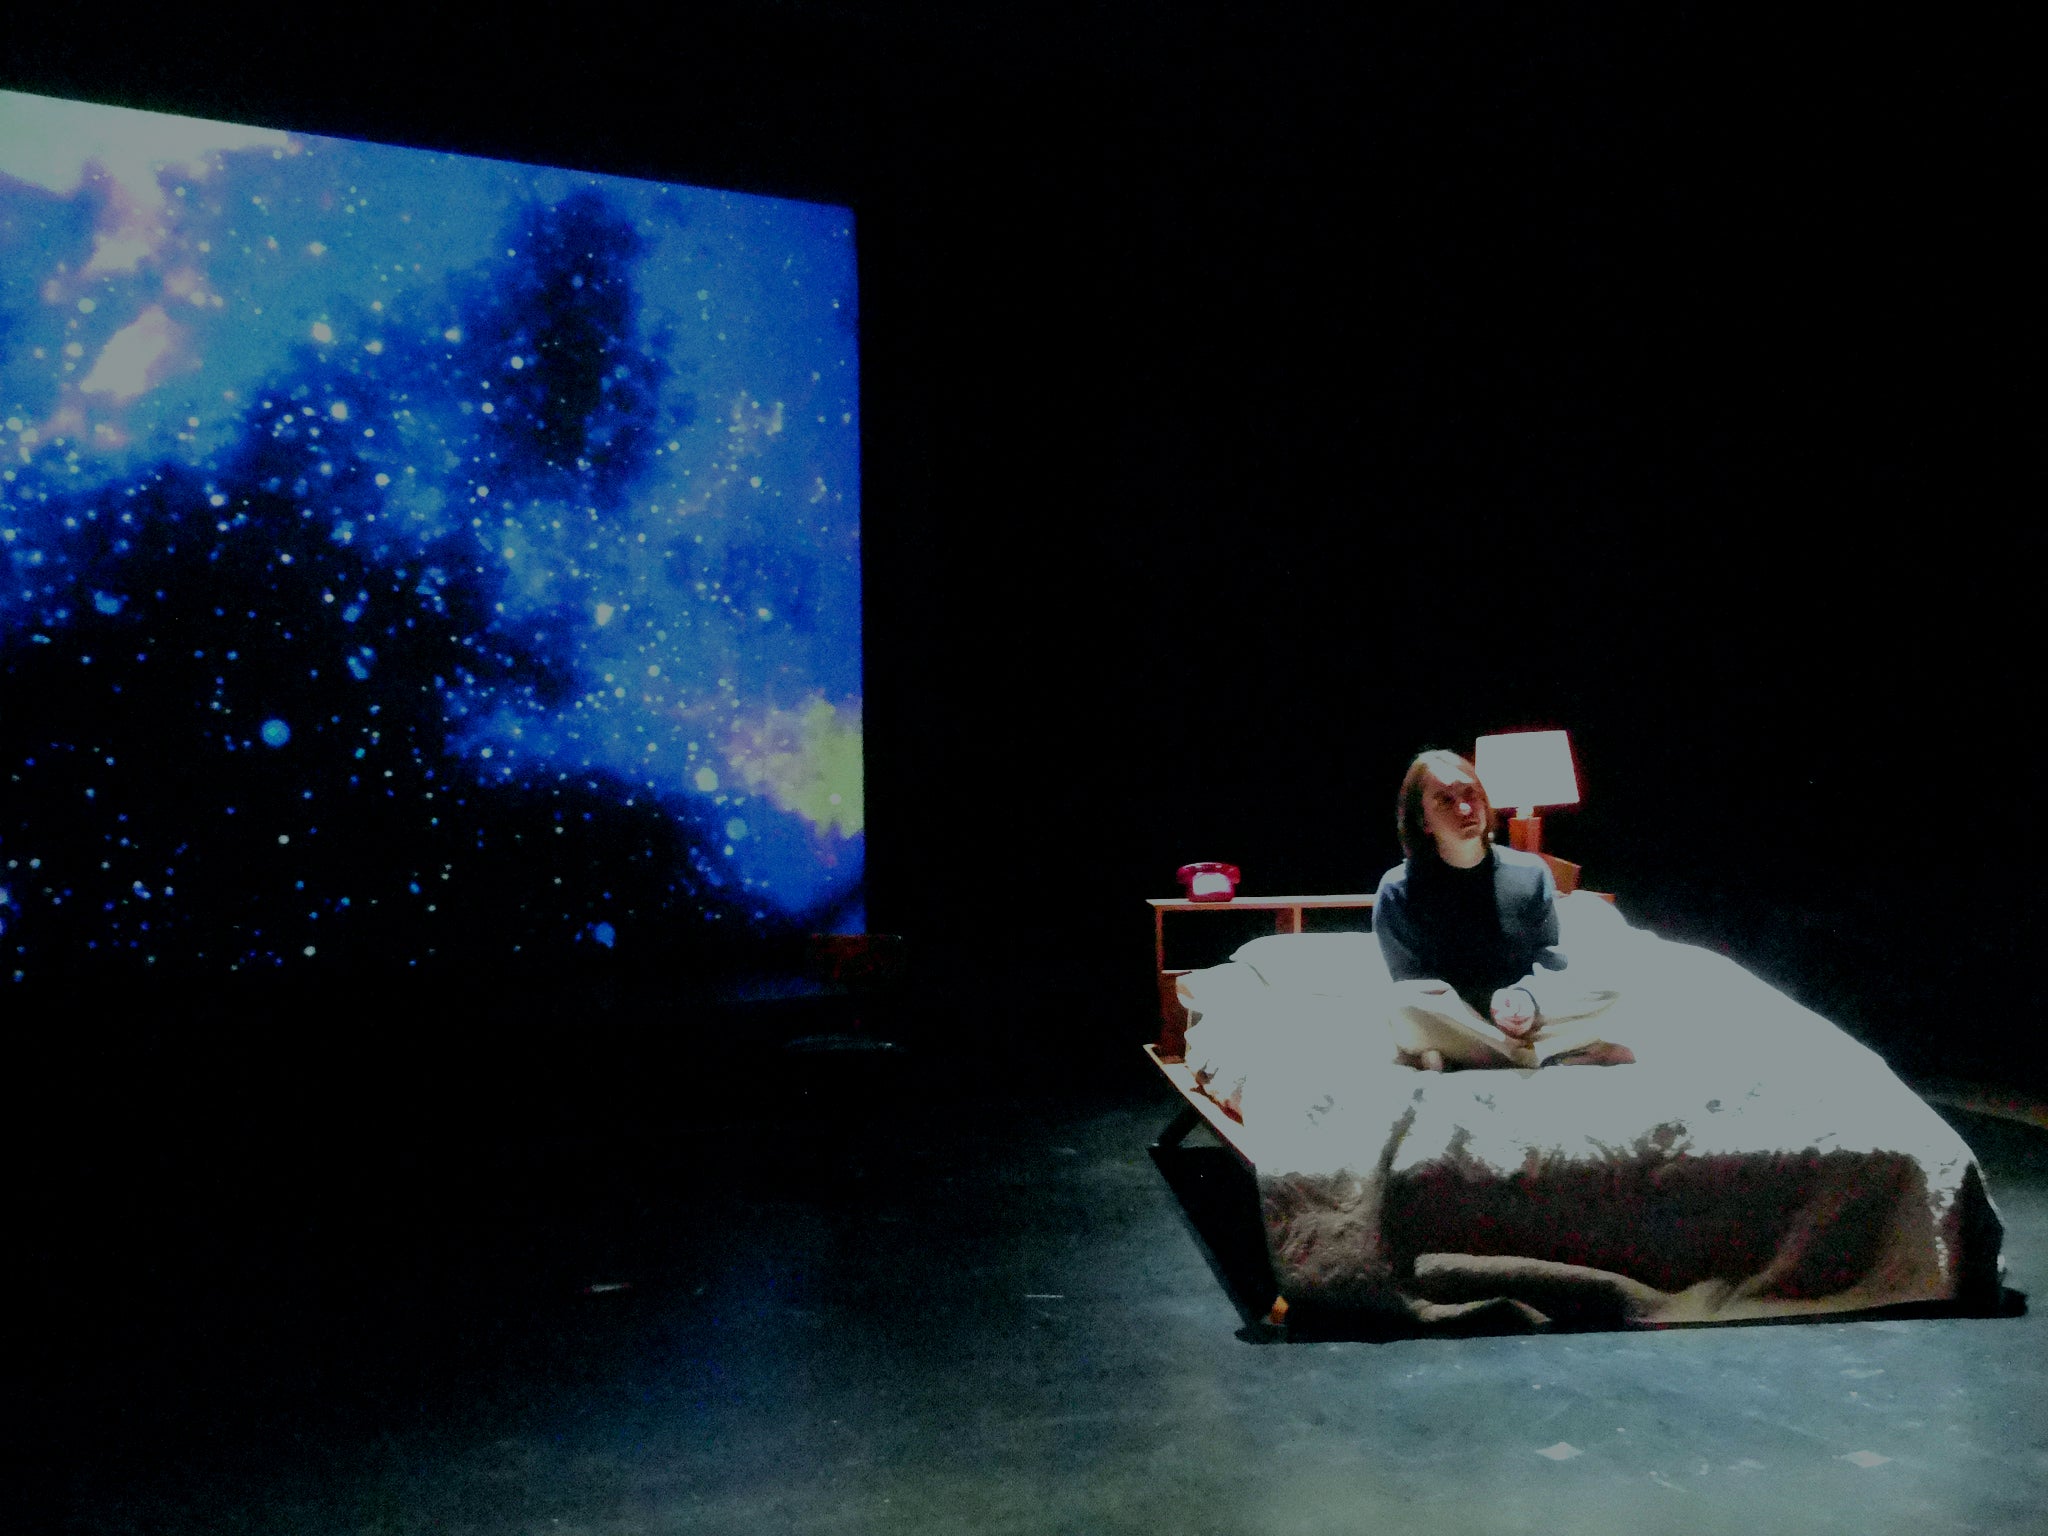 A bed is on stage and stars are projected behind